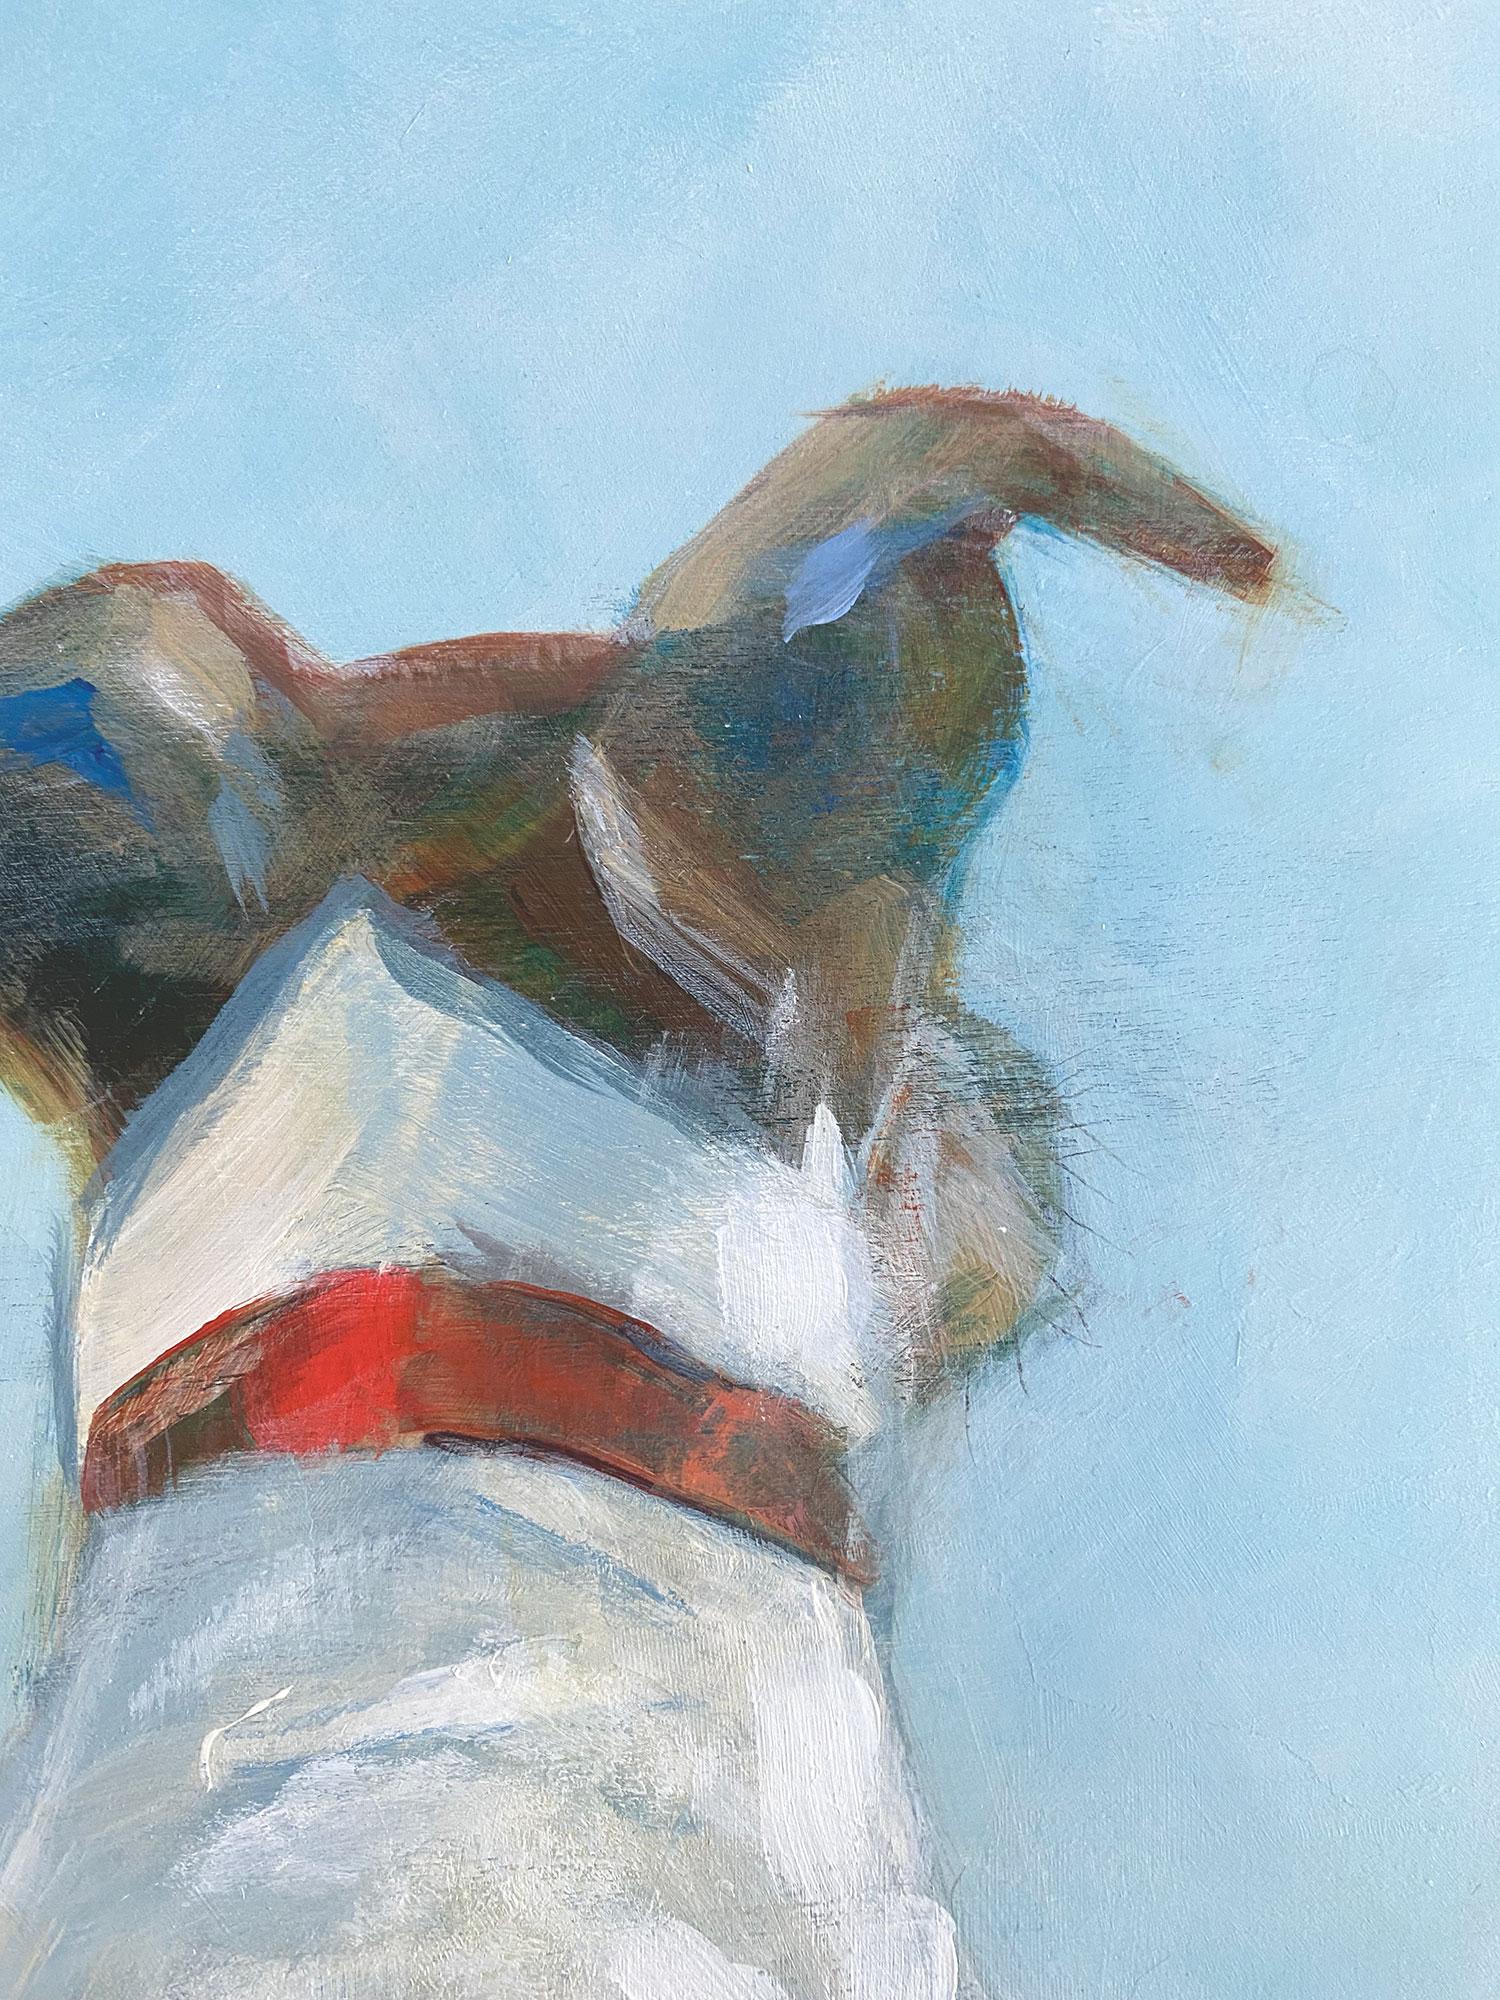 <p>Artist Comments<br>A Jack Russel sits contemplatively gazing at an expansive landscape. Artist Sally Adams paints the peaceful scene with soft brushstrokes and a complementing vibrant palette in red, green, and blue. 